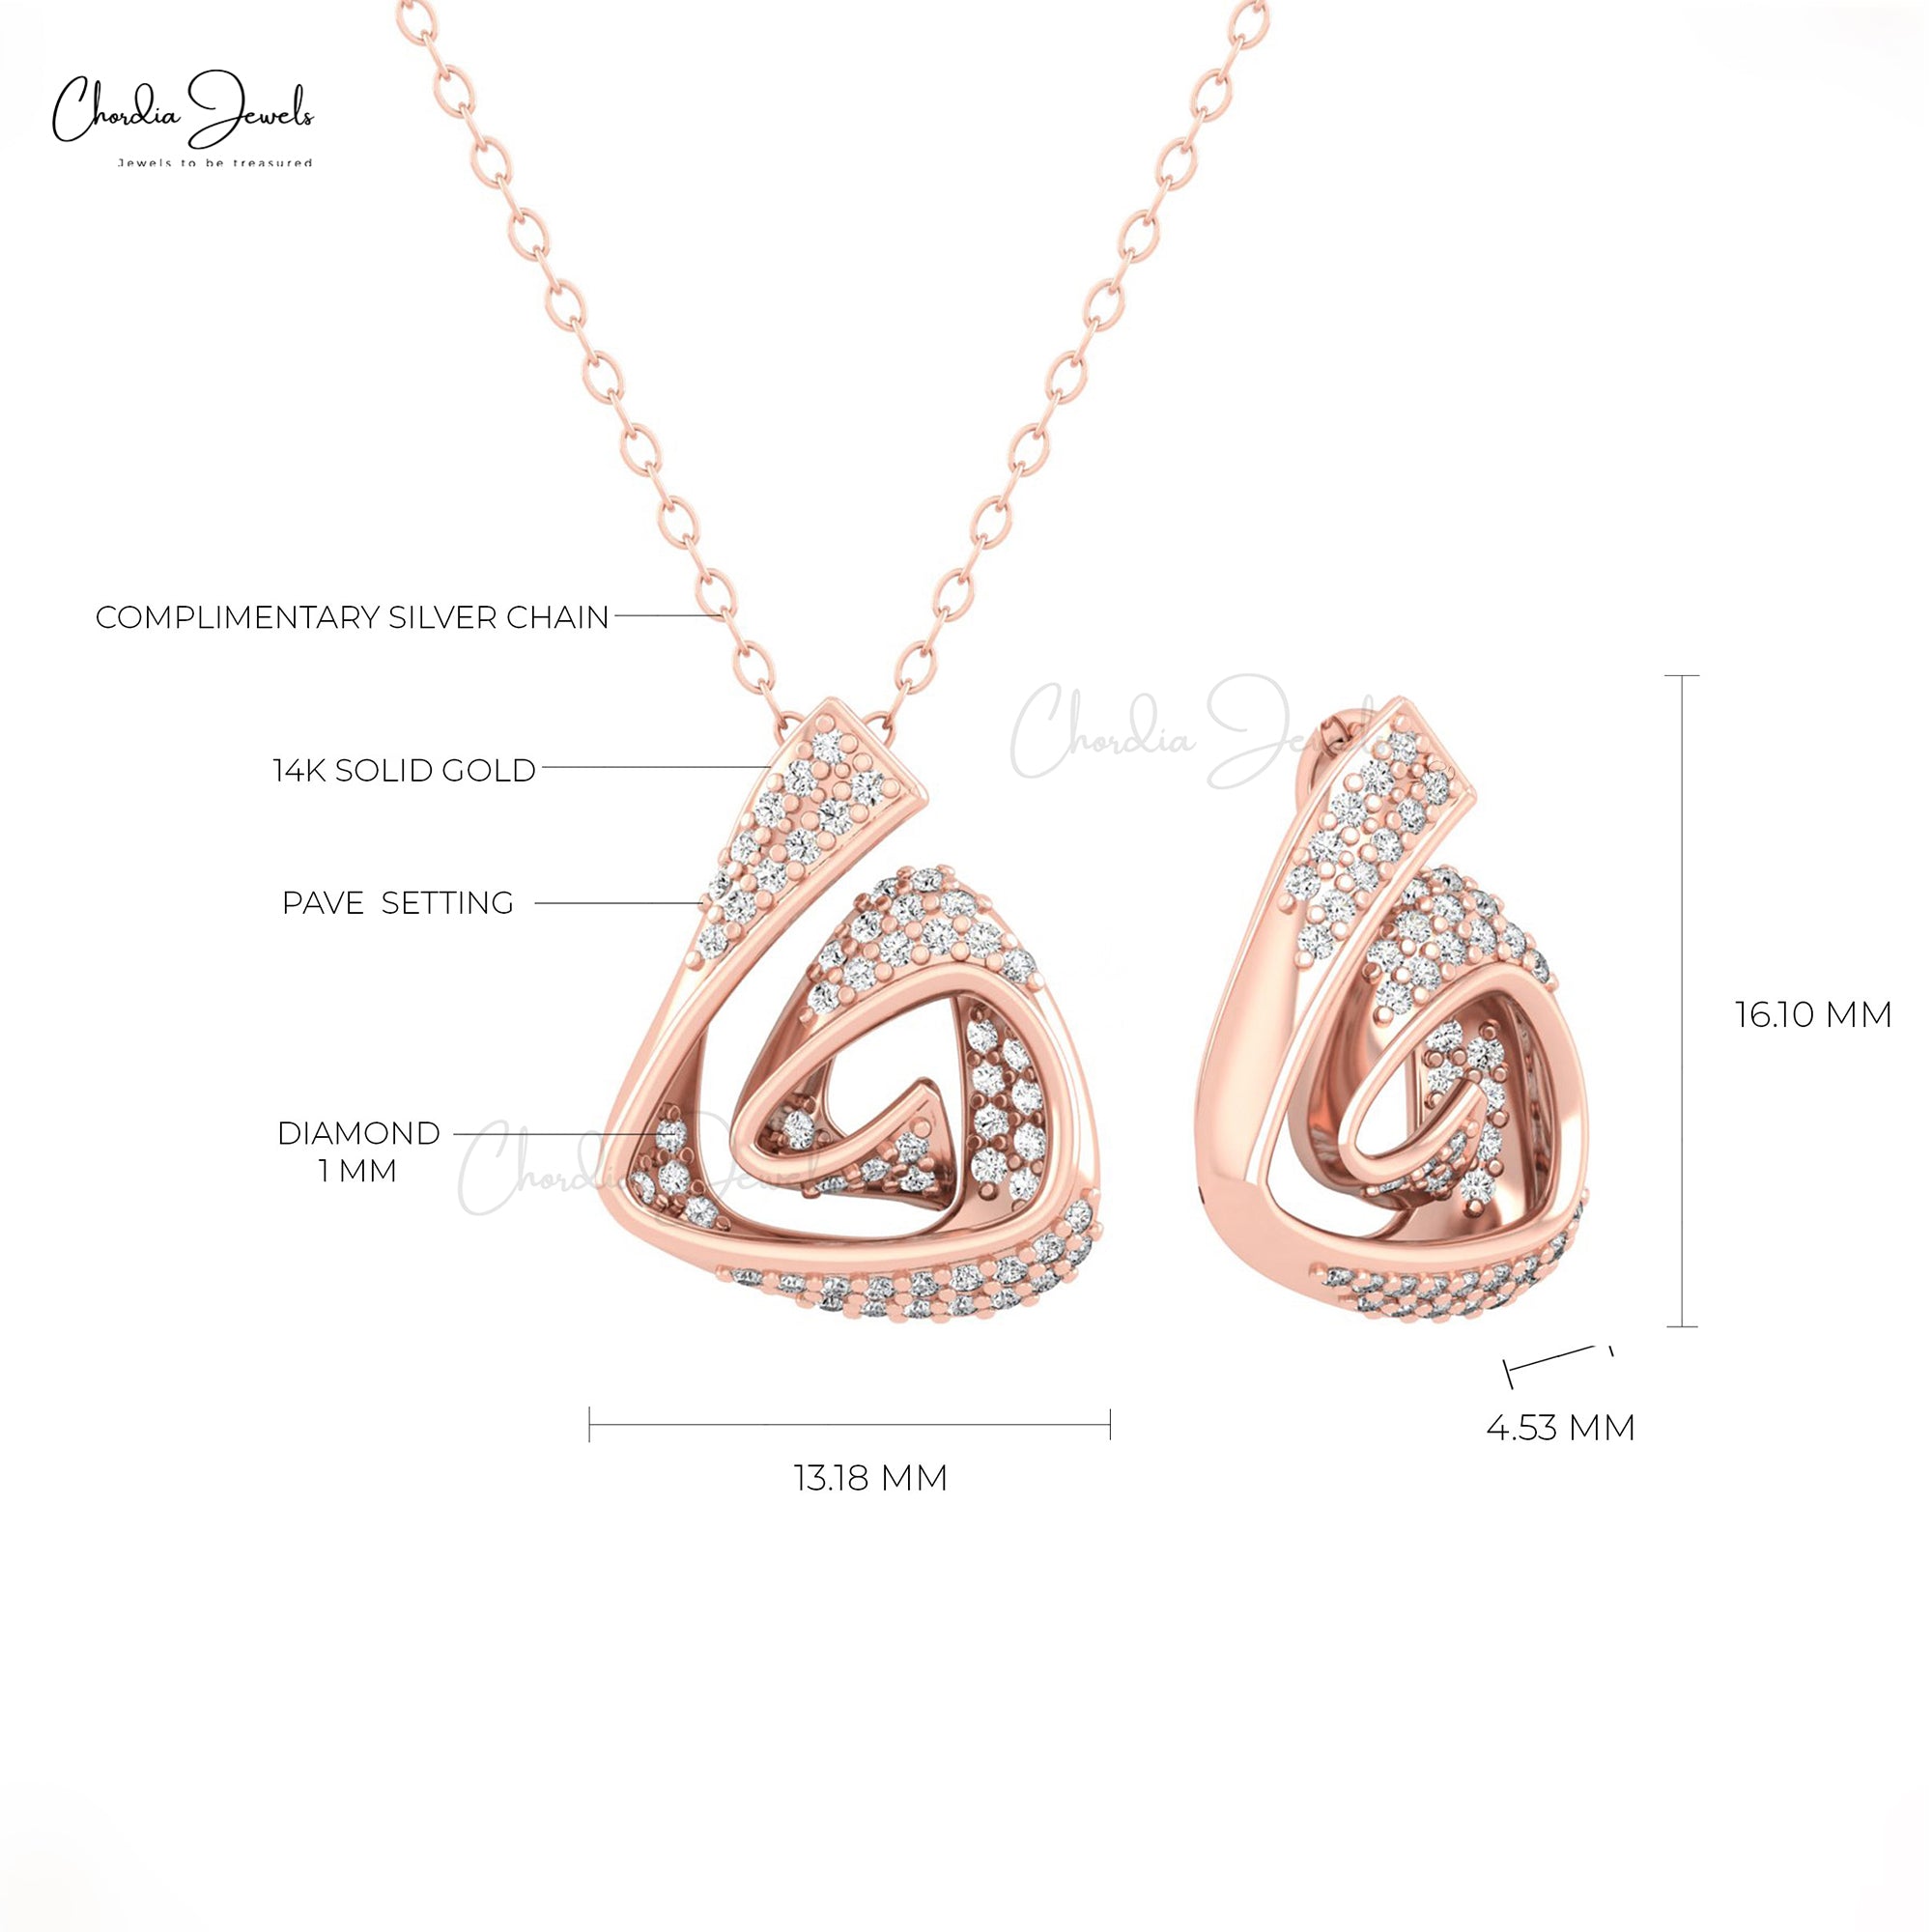 Anavia Mother's Day Gift for Girlfriend, Girlfriend Birthday Gift, Heart  Necklace, Necklace for Girlfriend, Gifts for Girlfriend, Anniversary Gift,  Gift for Mom - [Rose Gold] - Walmart.com